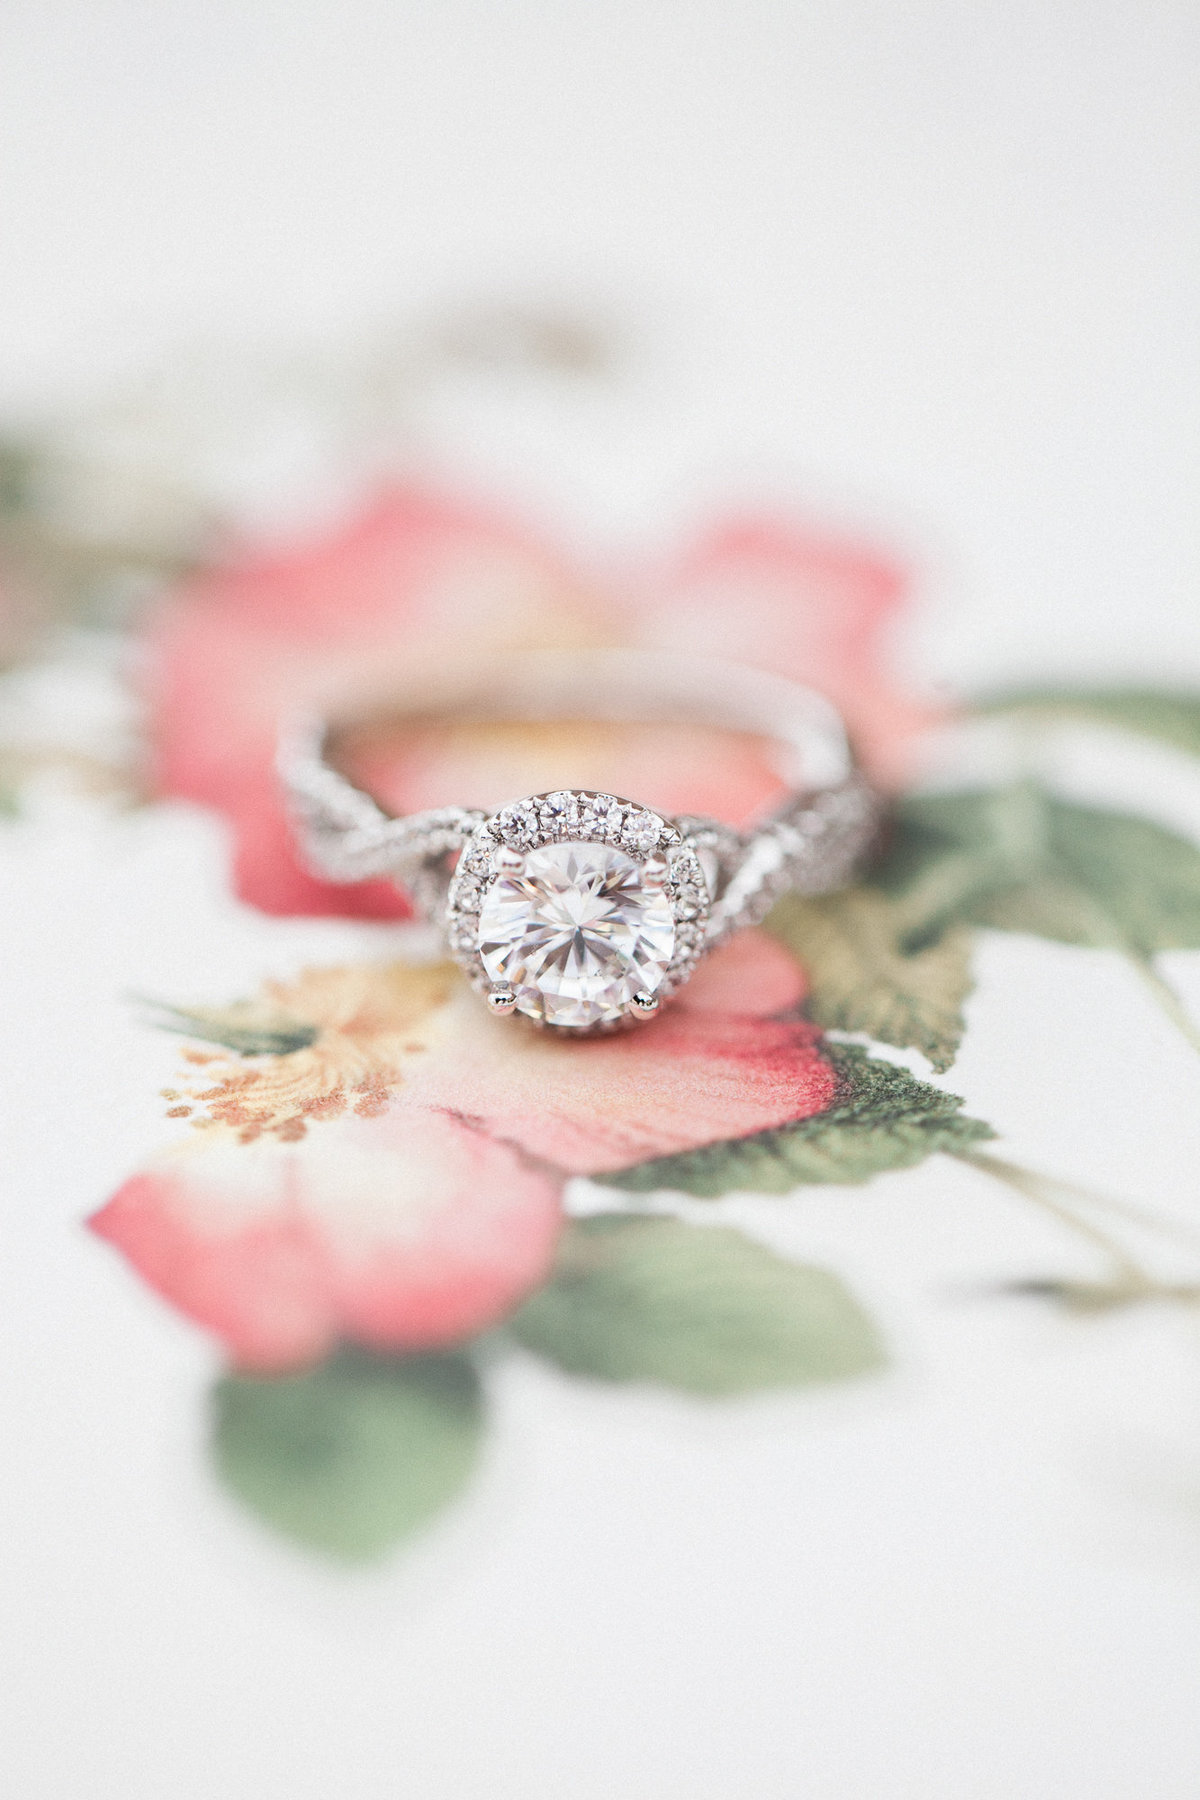 Mary Claire Photography-37